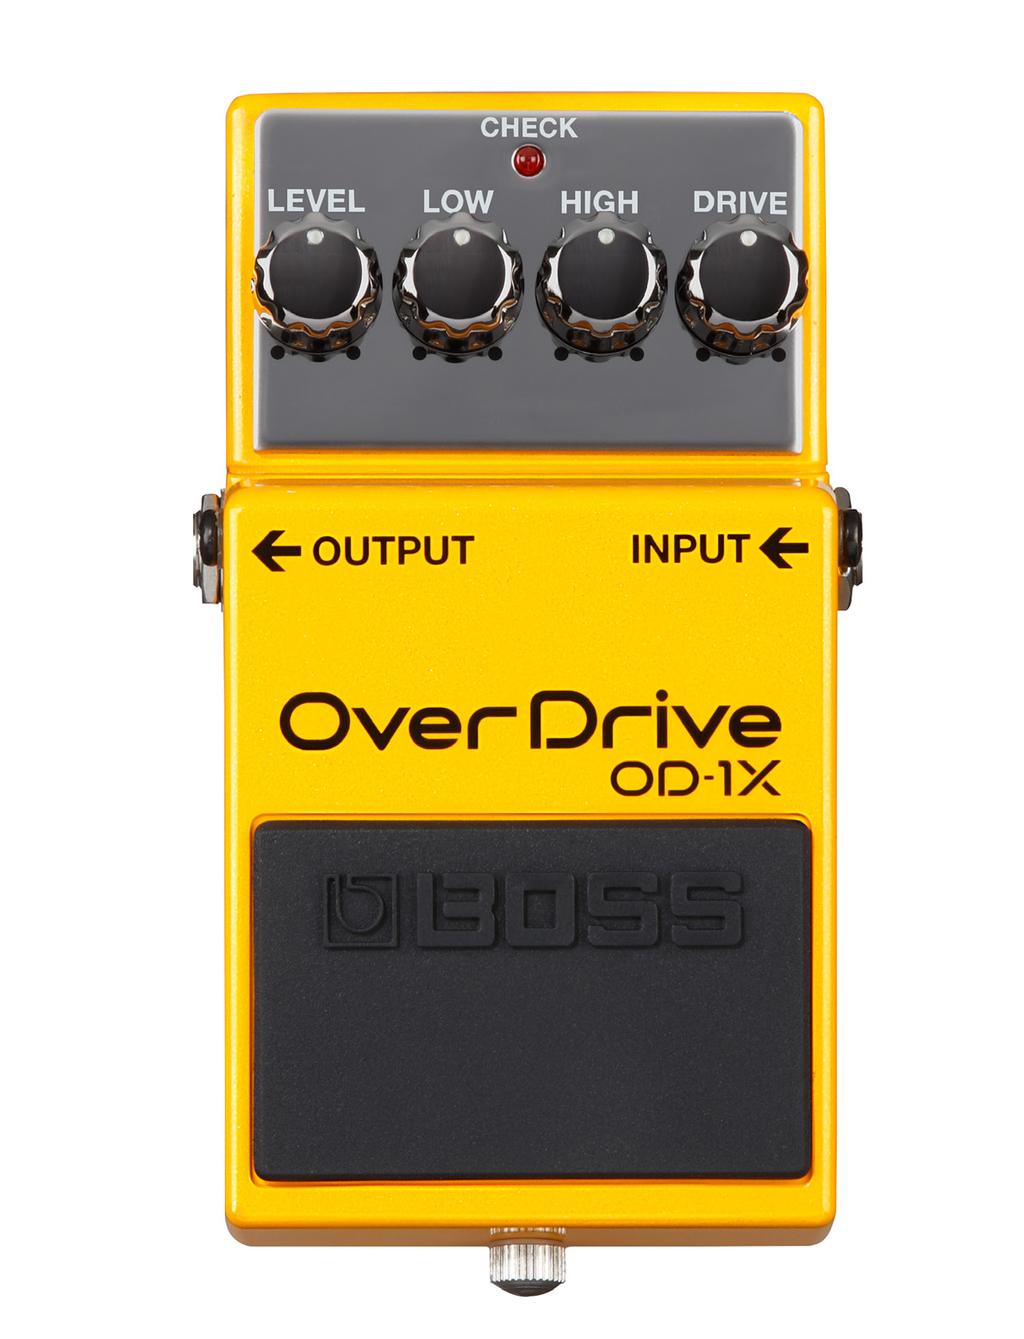 OD-1X Overdrive Special Edition BOSS Pedal with Premium Tone The OD-1X launches the famous BOSS overdrive into a modern era of expression, delivering an unmatched level of performance for guitarists